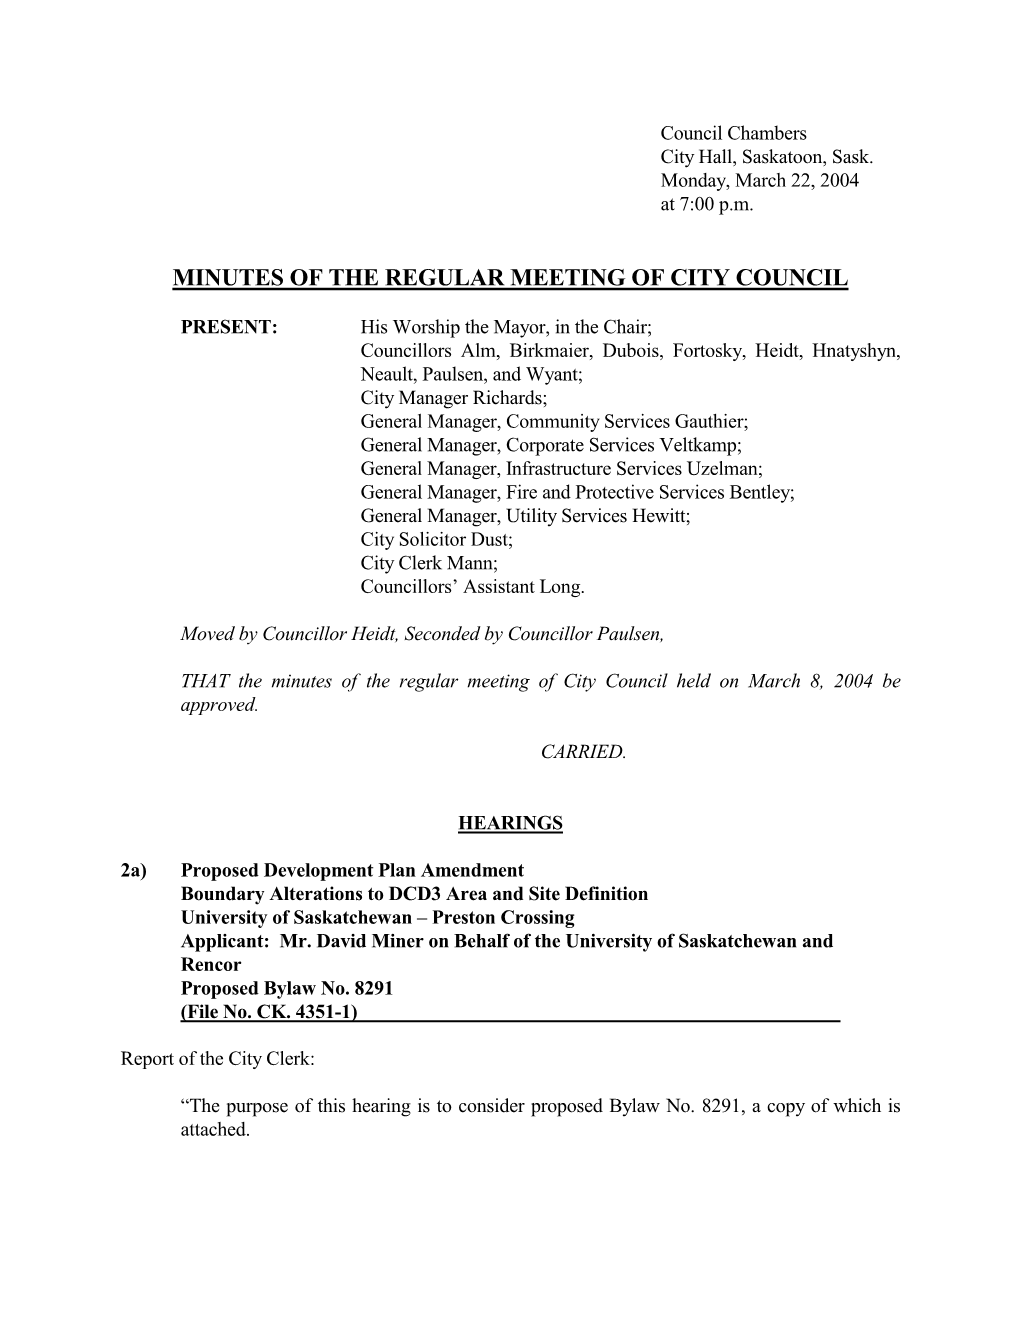 Minutes of the Regular Meeting of City Council